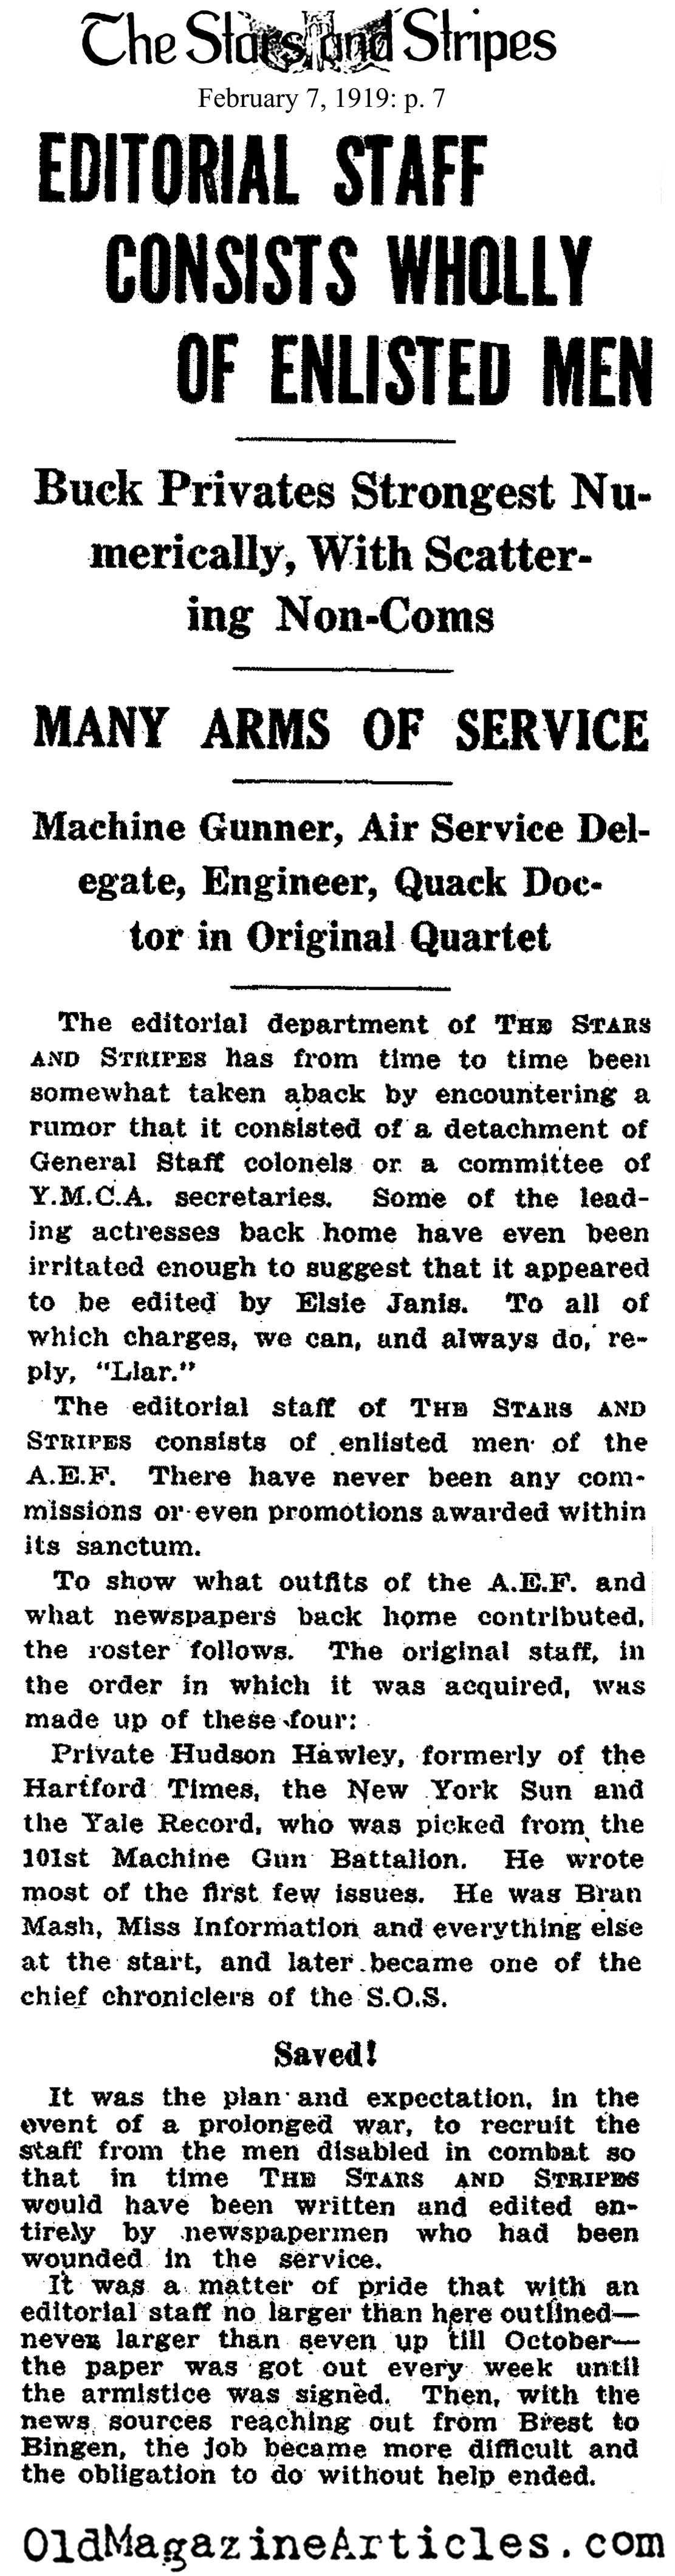 How the 'Stars & Stripes' Operated (The Stars and Stripes, 1919)